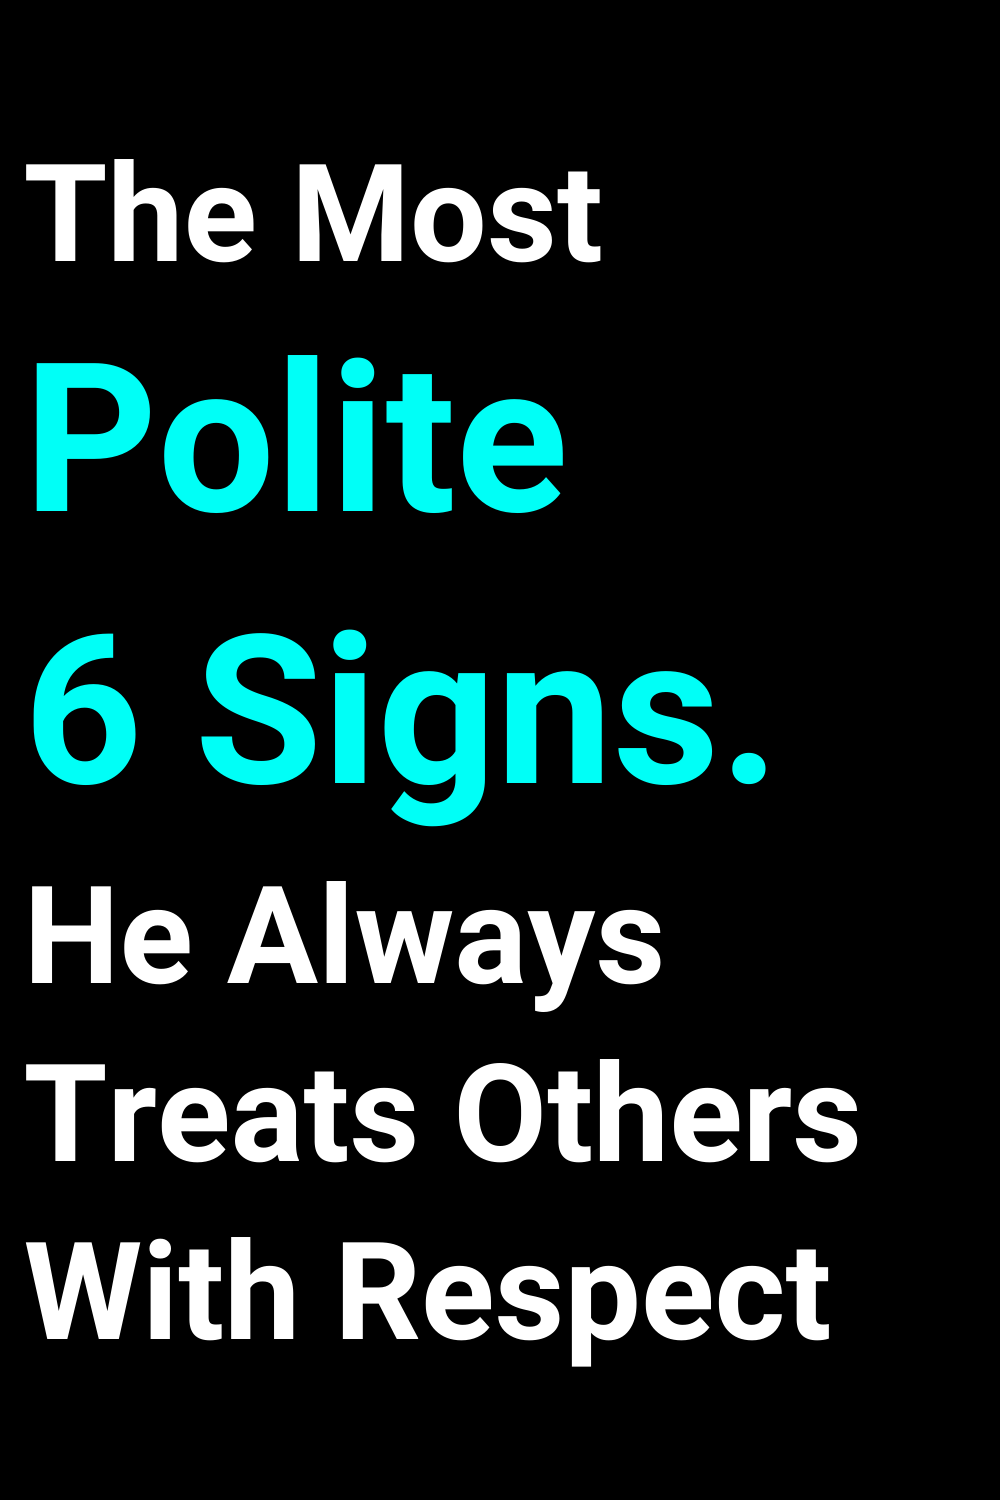 The Most Polite 6 Signs. He Always Treats Others With Respect